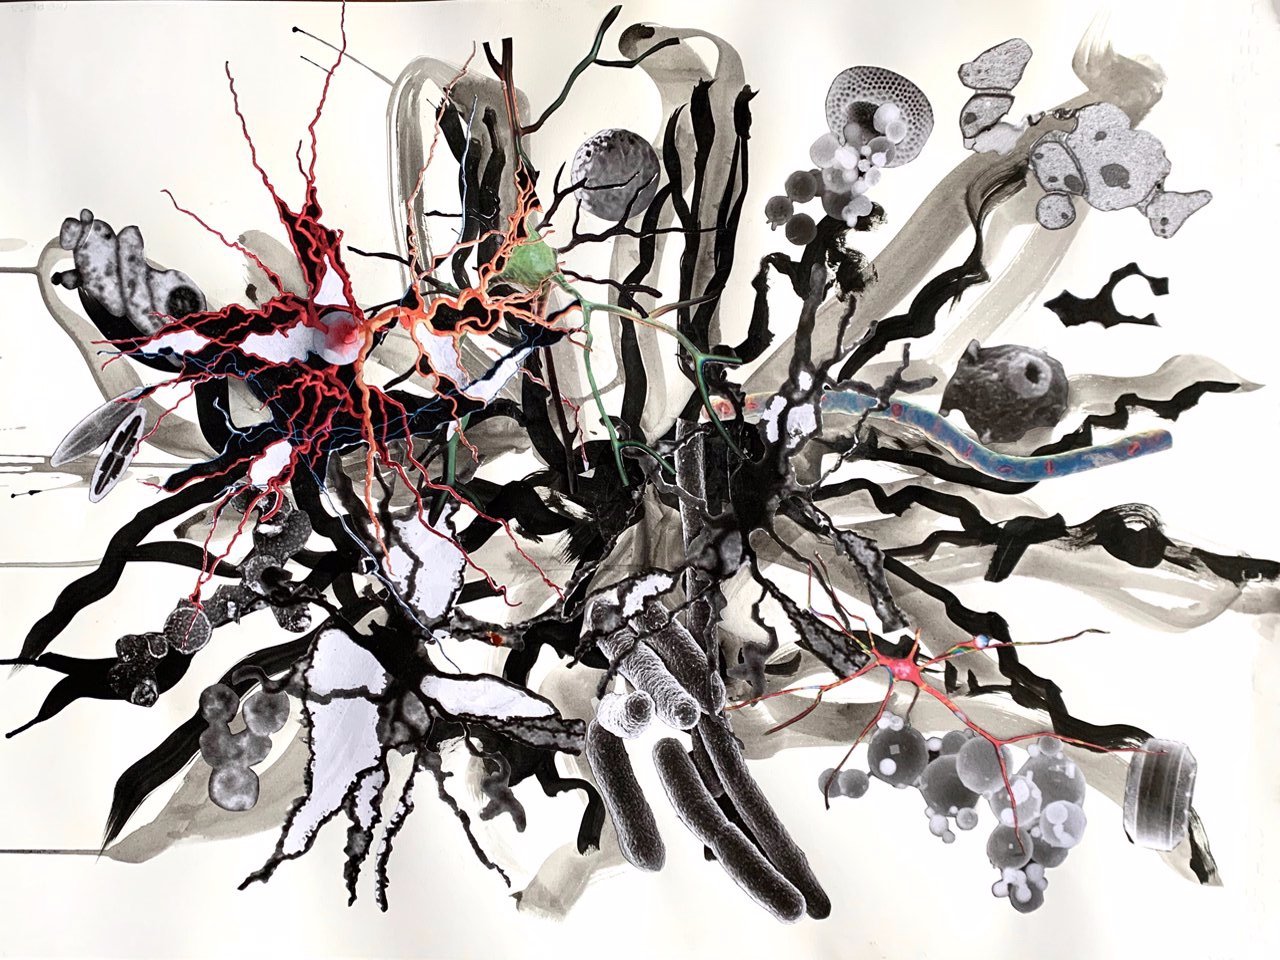   Brains 0876 , 2021, graphite, India ink, printer ink and paper on paper, 24"x30"  